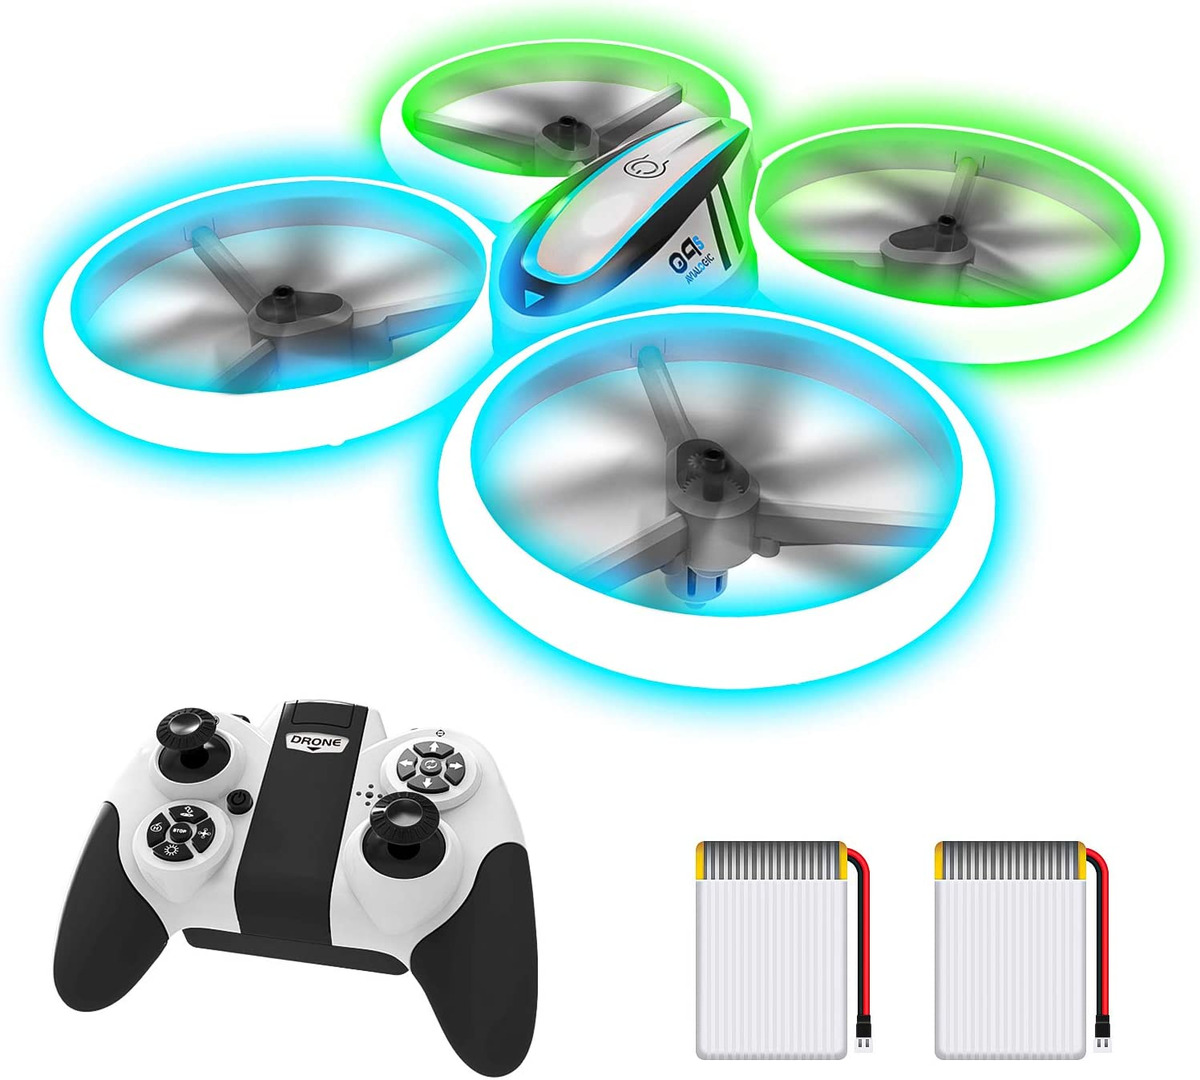 Q9s Drones for Kids,RC Drone with Altitude Hold and Headless Mode